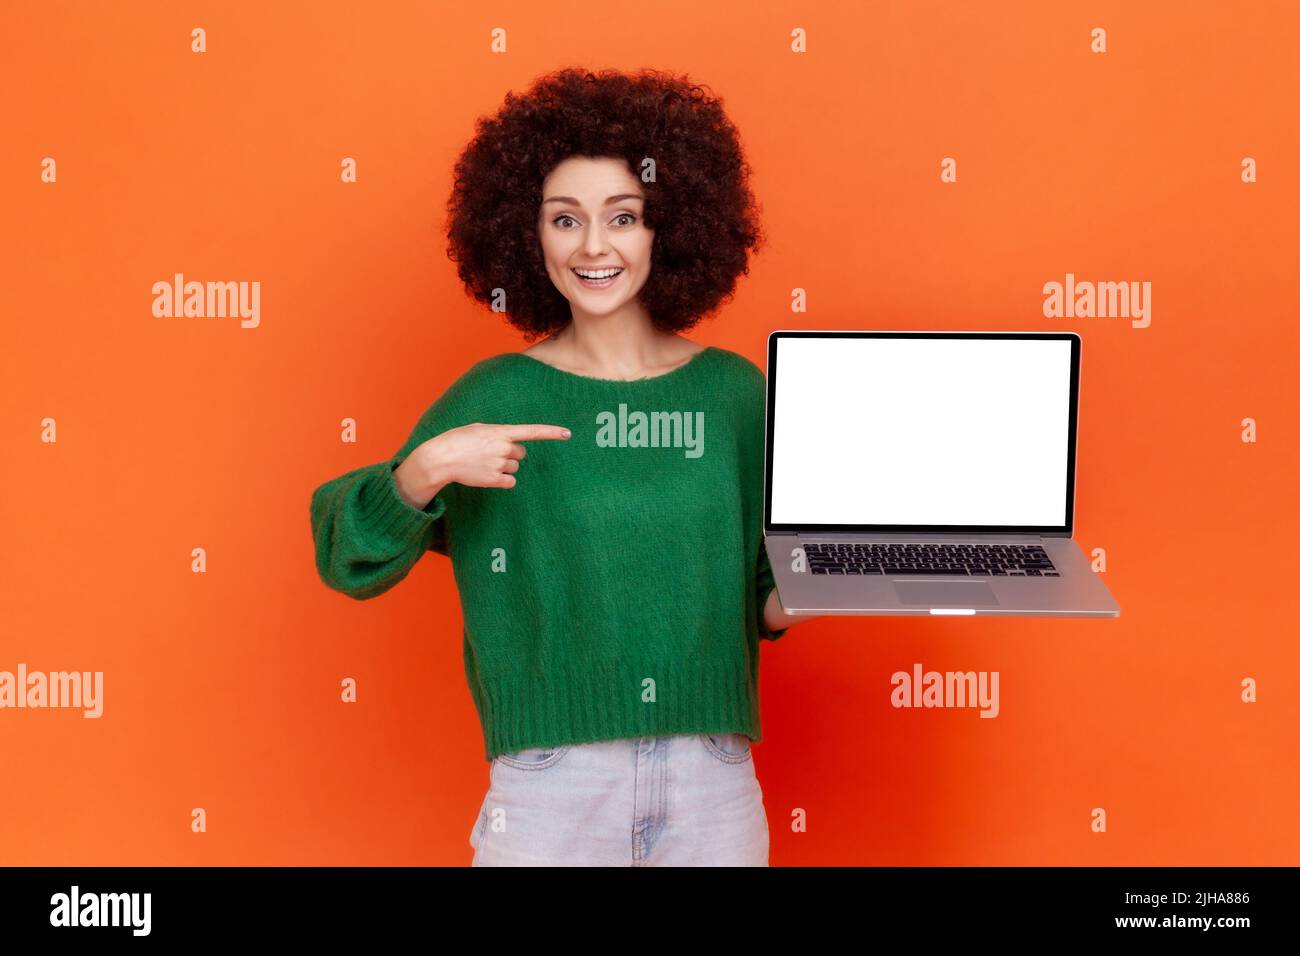 Good looking smiling woman with Afro hairstyle wearing green casual style sweater pointing at blank screen of laptop in her hands. Indoor studio shot isolated on orange background. Stock Photo